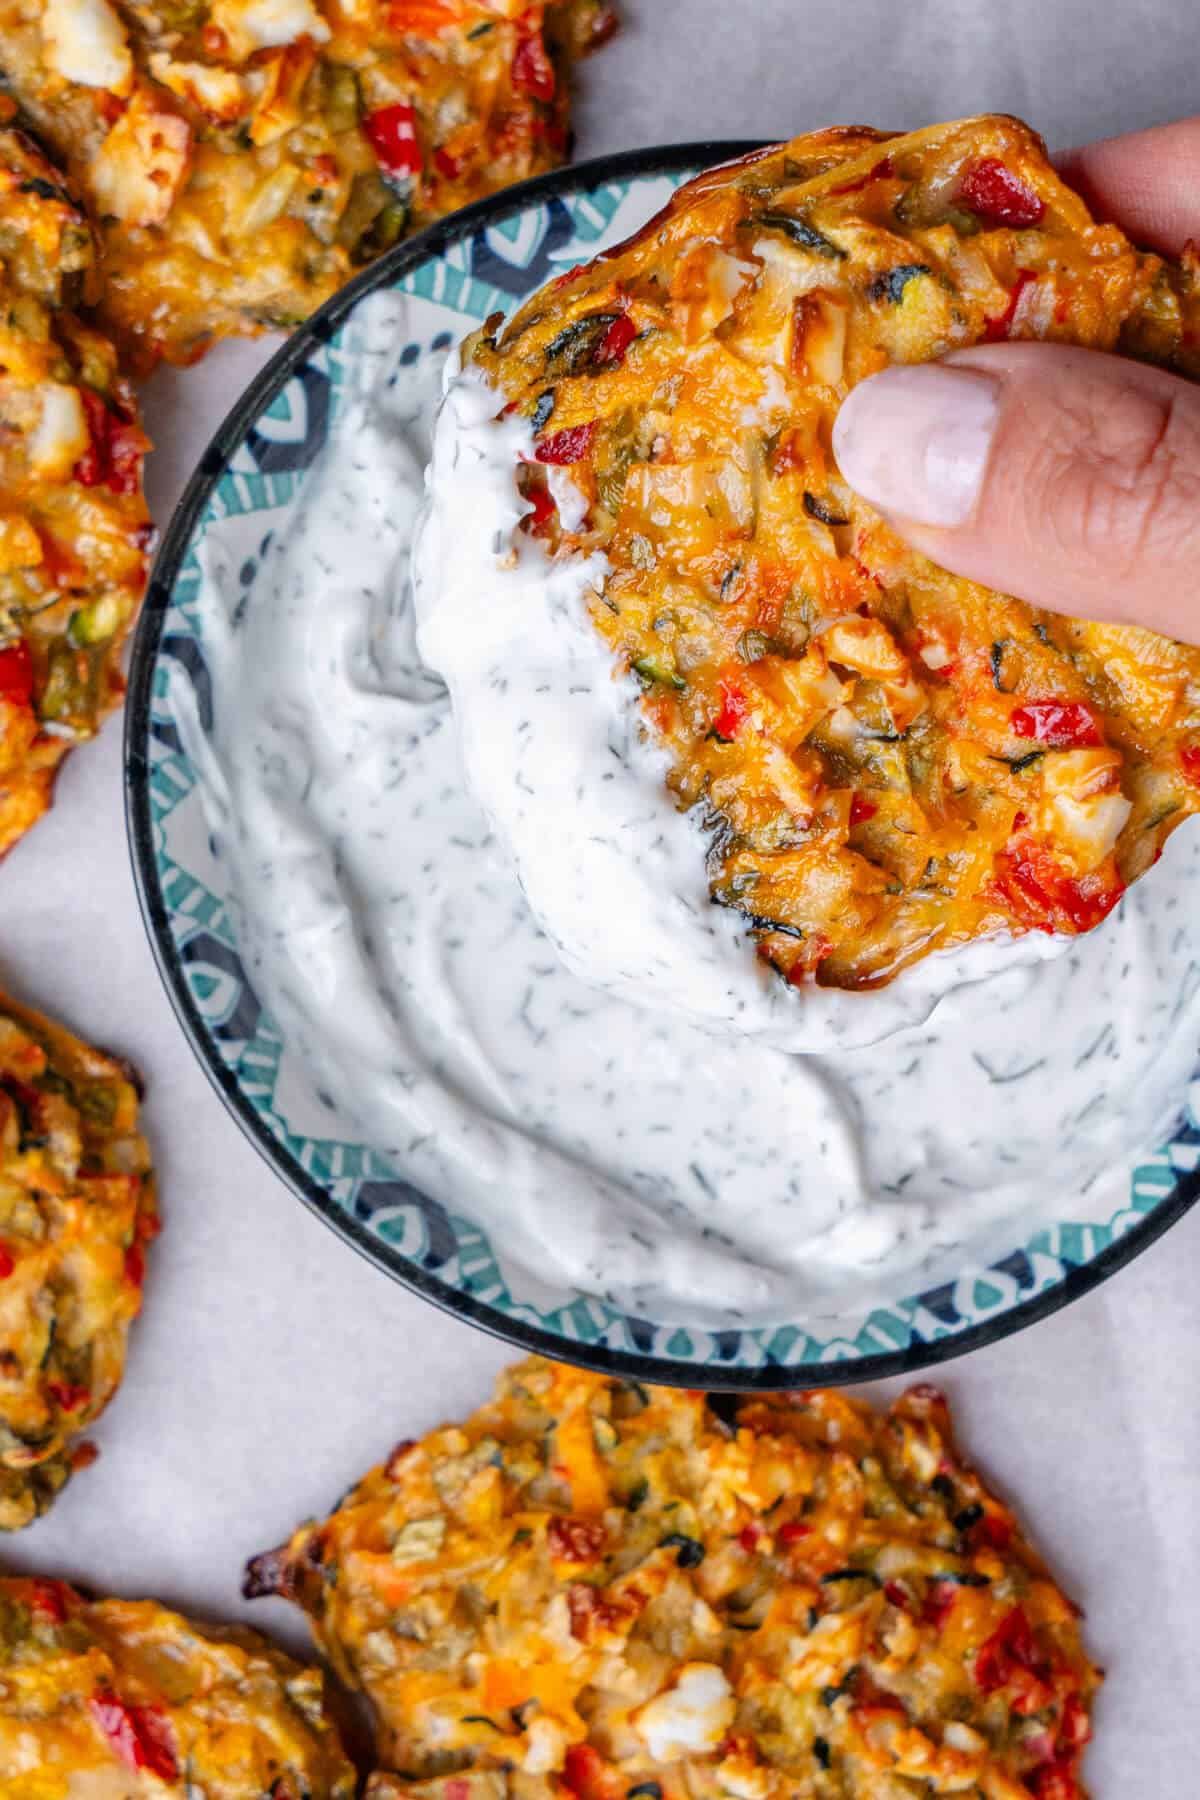 Veggie fritter being dipped into a yoghurt sauce